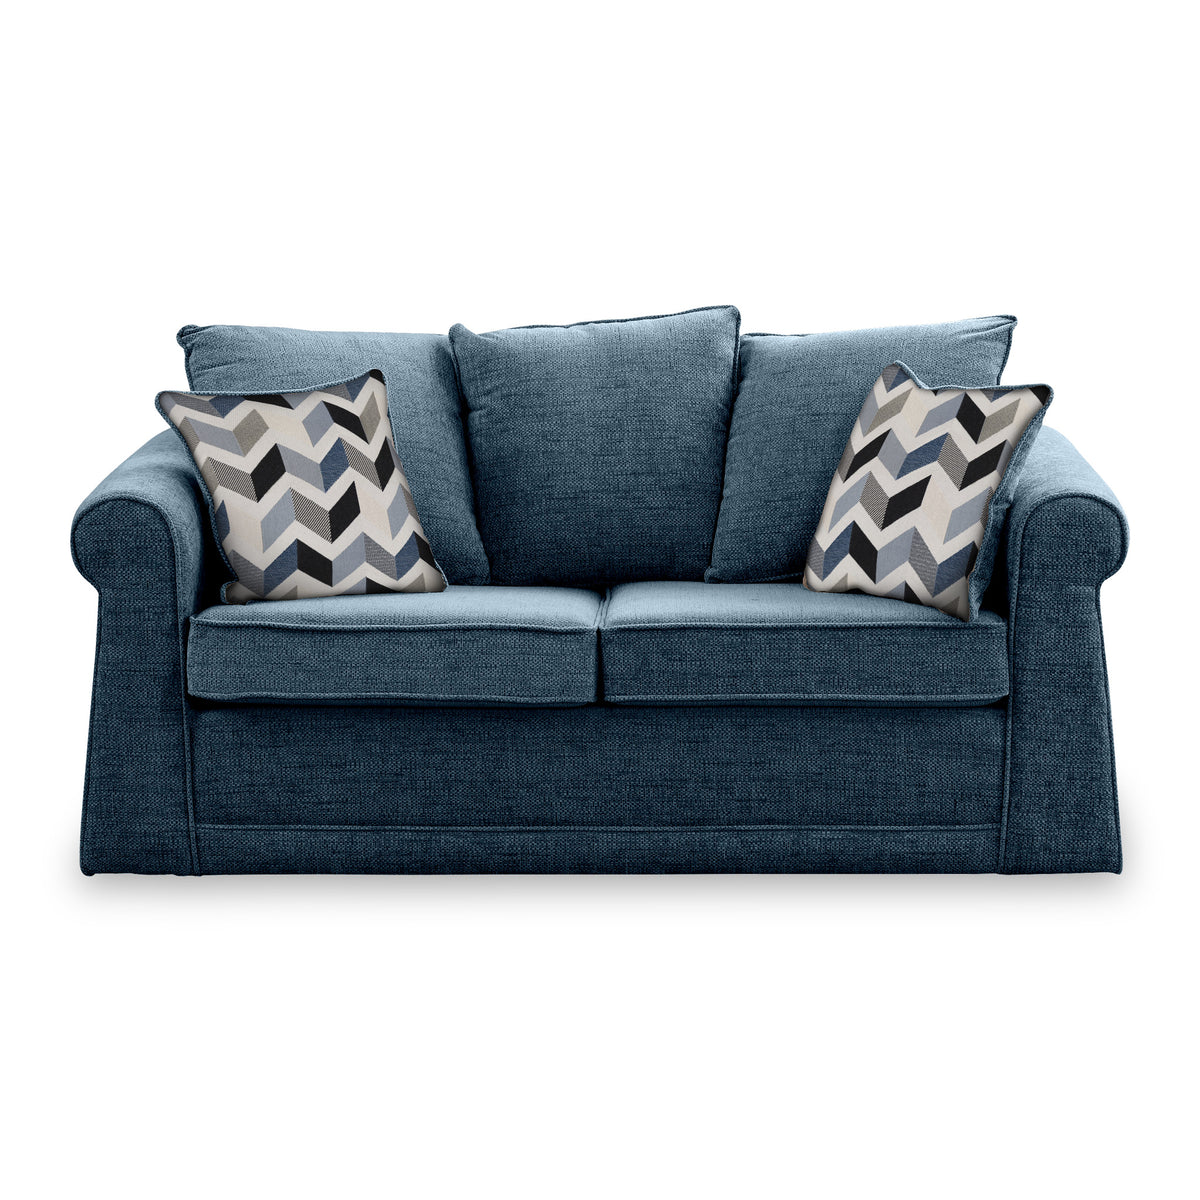 Branston Midnight Soft Weave 2 Seater Sofabed with Denim Scatter Cushions from Roseland Furniture